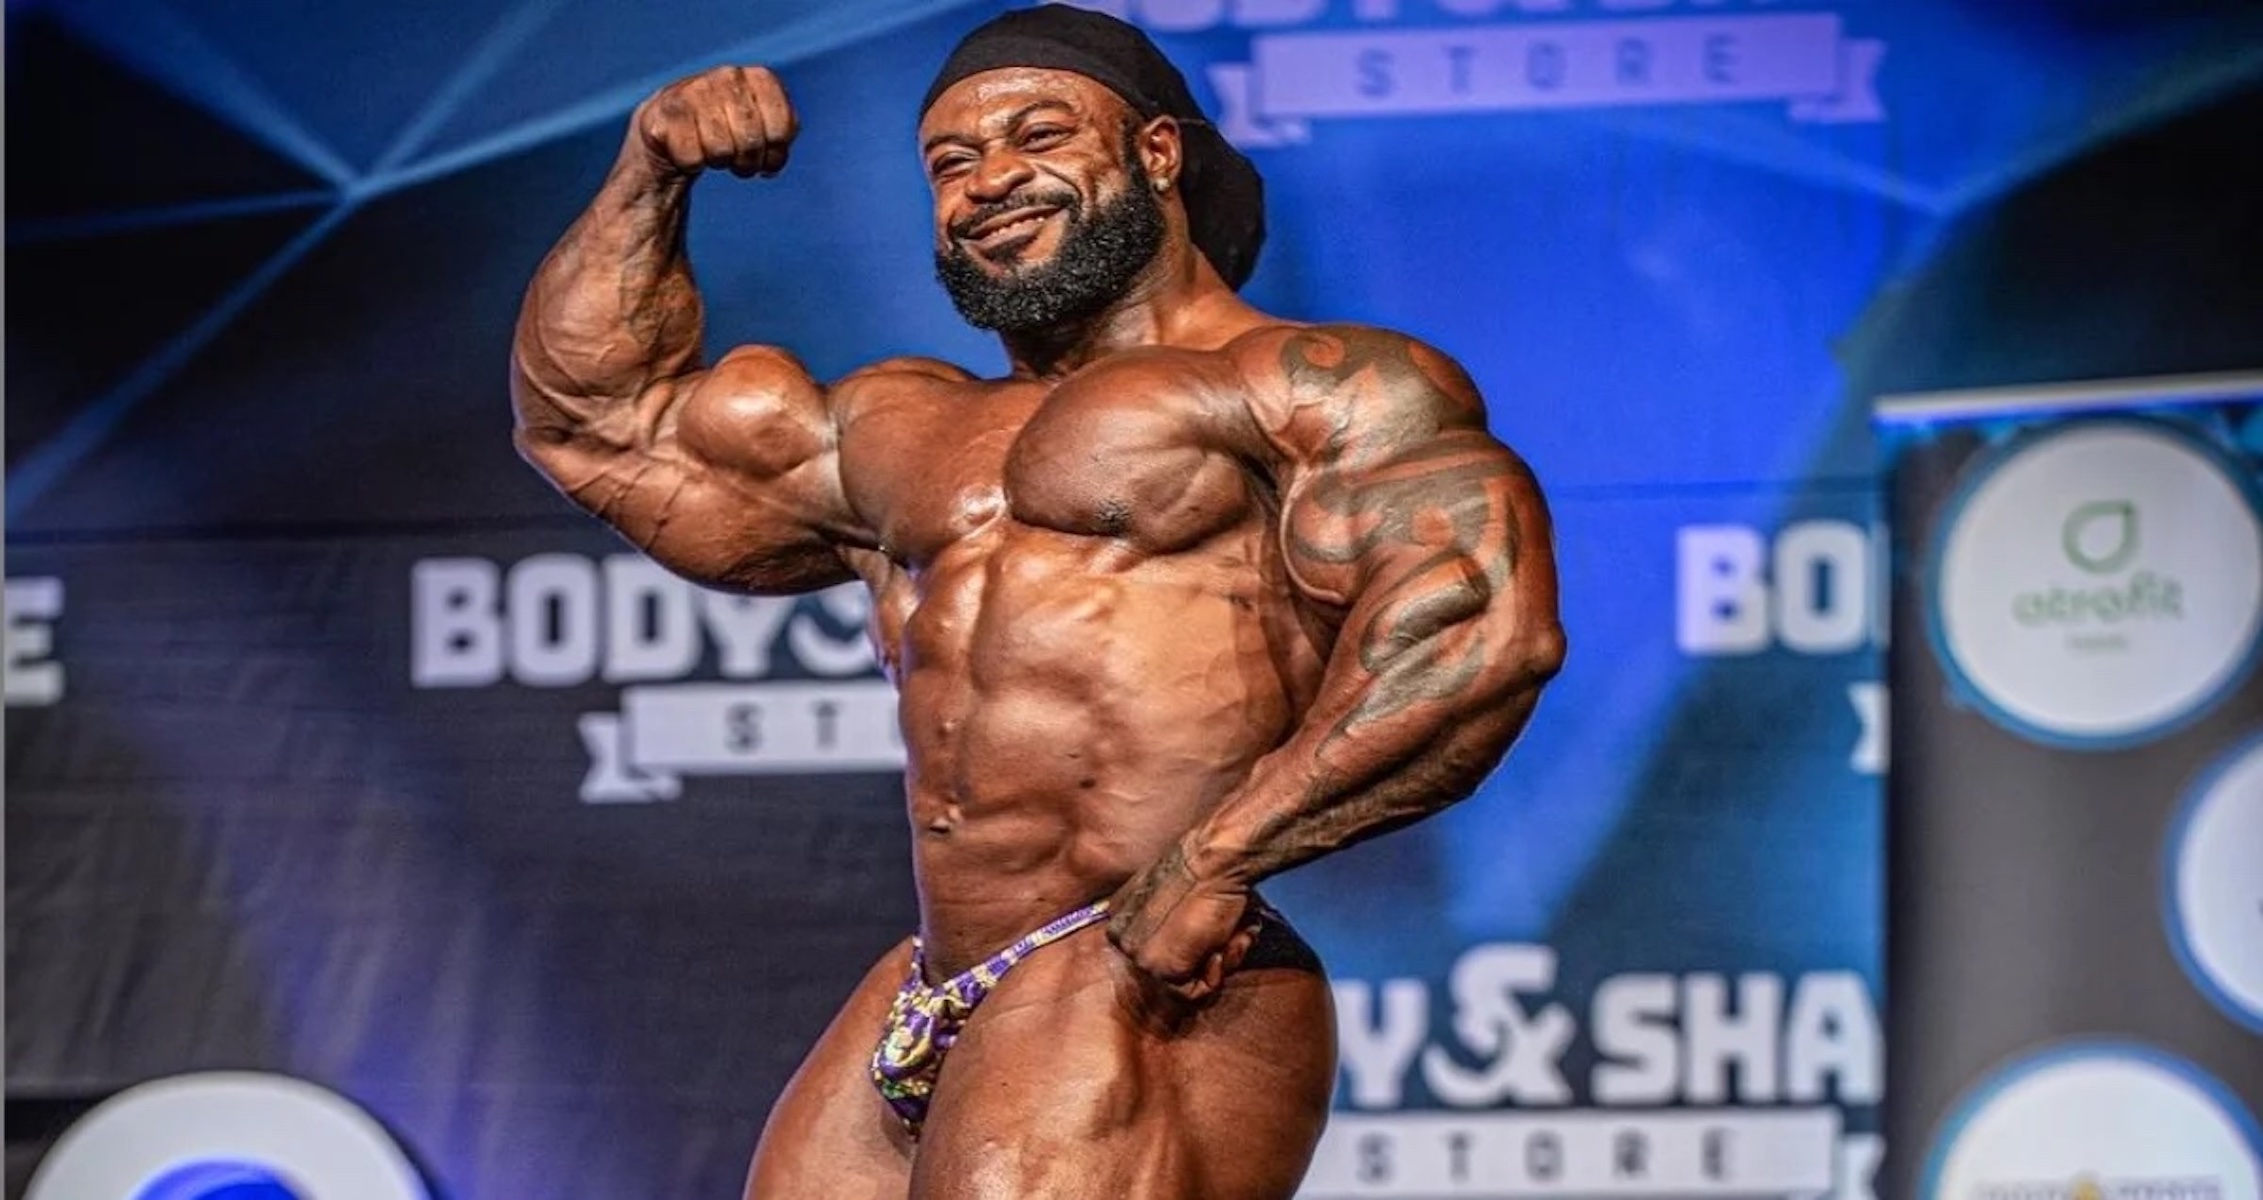 William Bonac Reflects On Second Place Finish At Arnold Classic: ‘What In Gods Name Do I Have To Do More?’